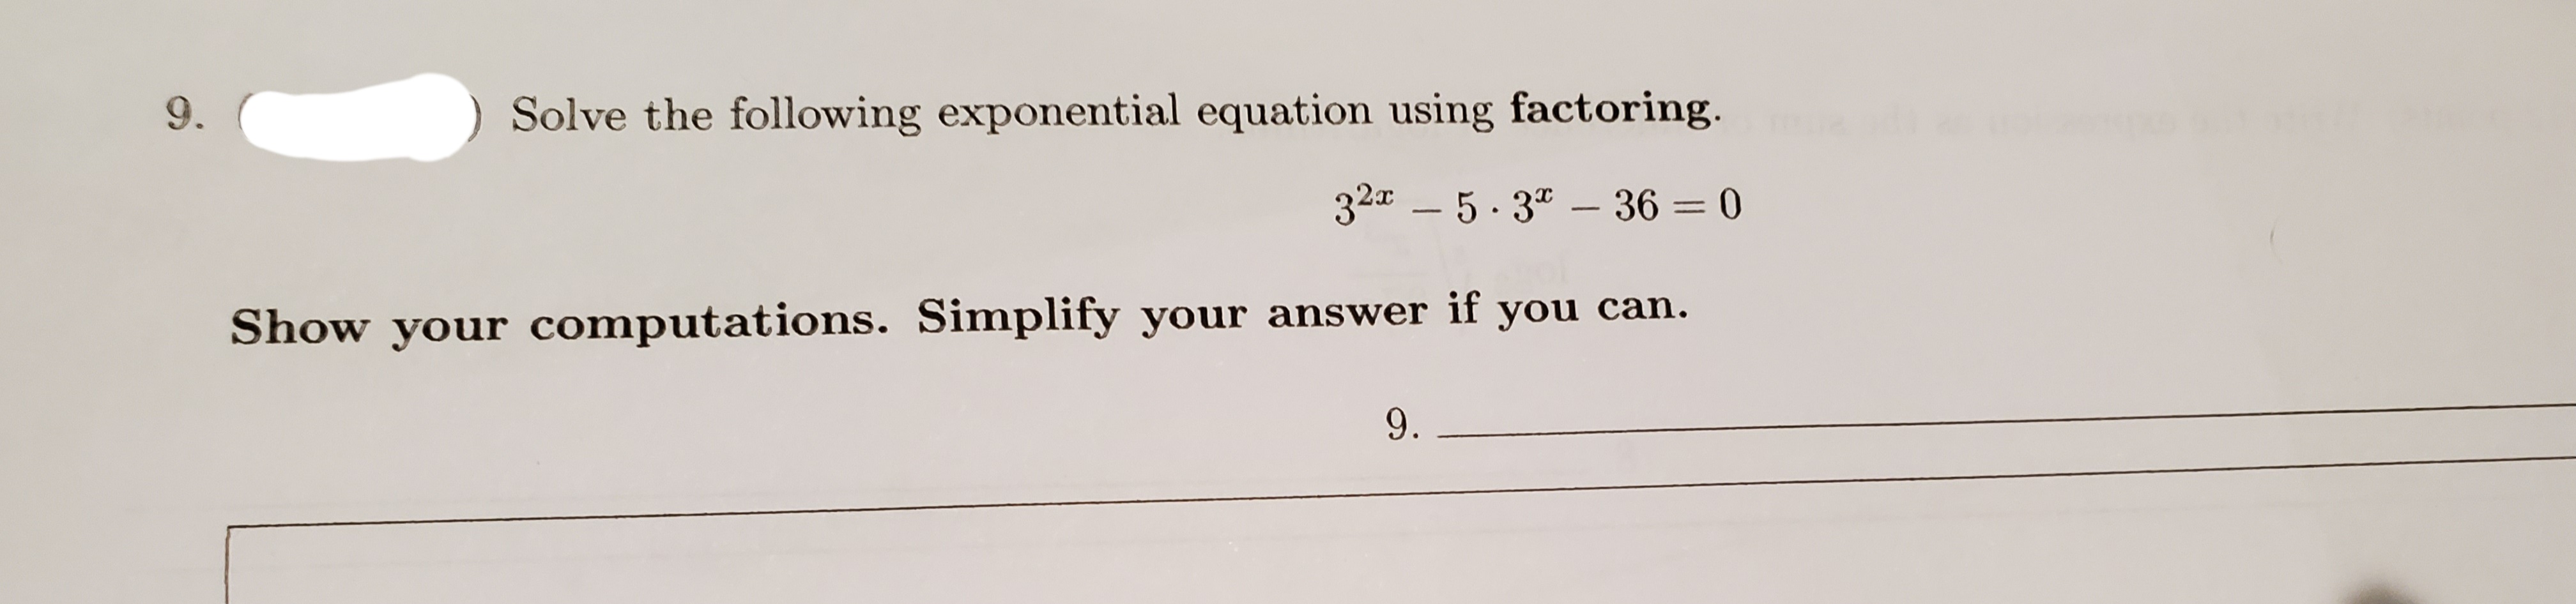 9.
Solve the following exponential equation using factoring.
32a – 5. 3" – 36 = 0
Show your computations. Simplify your answer if you can.
9.
